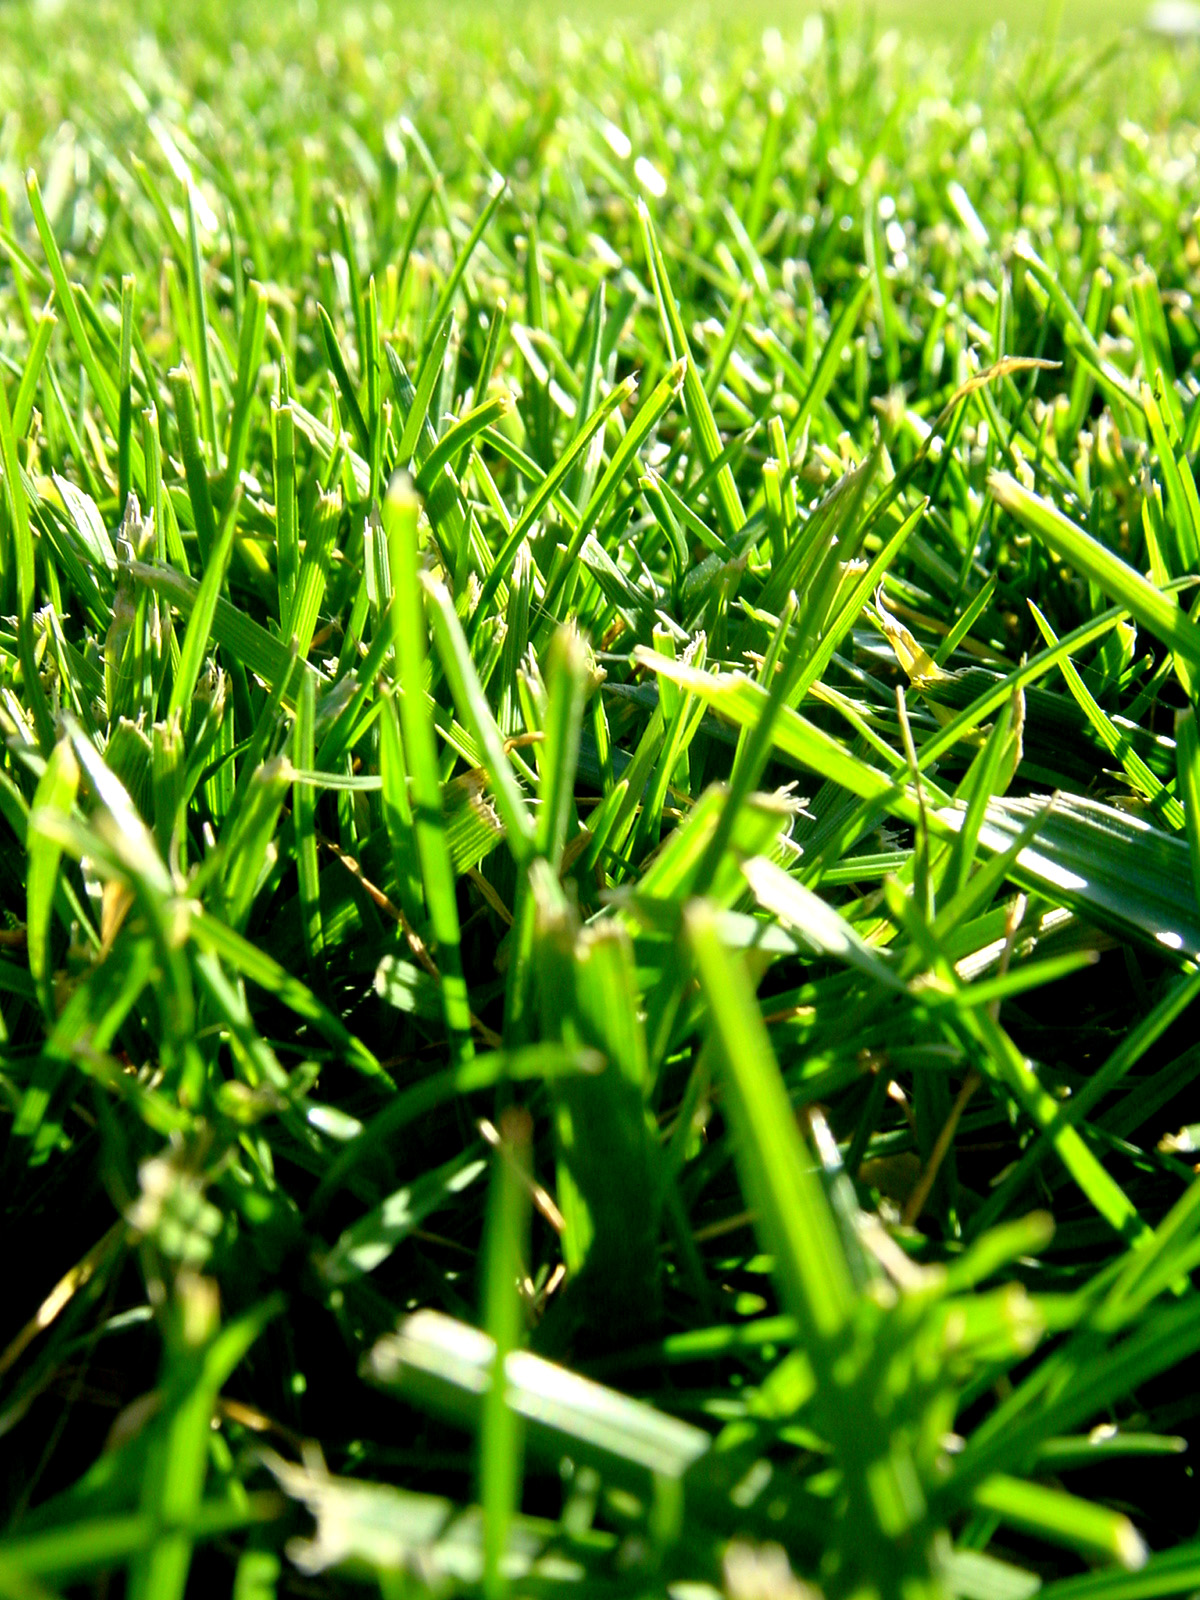 the lush grass of the lawn has long blades